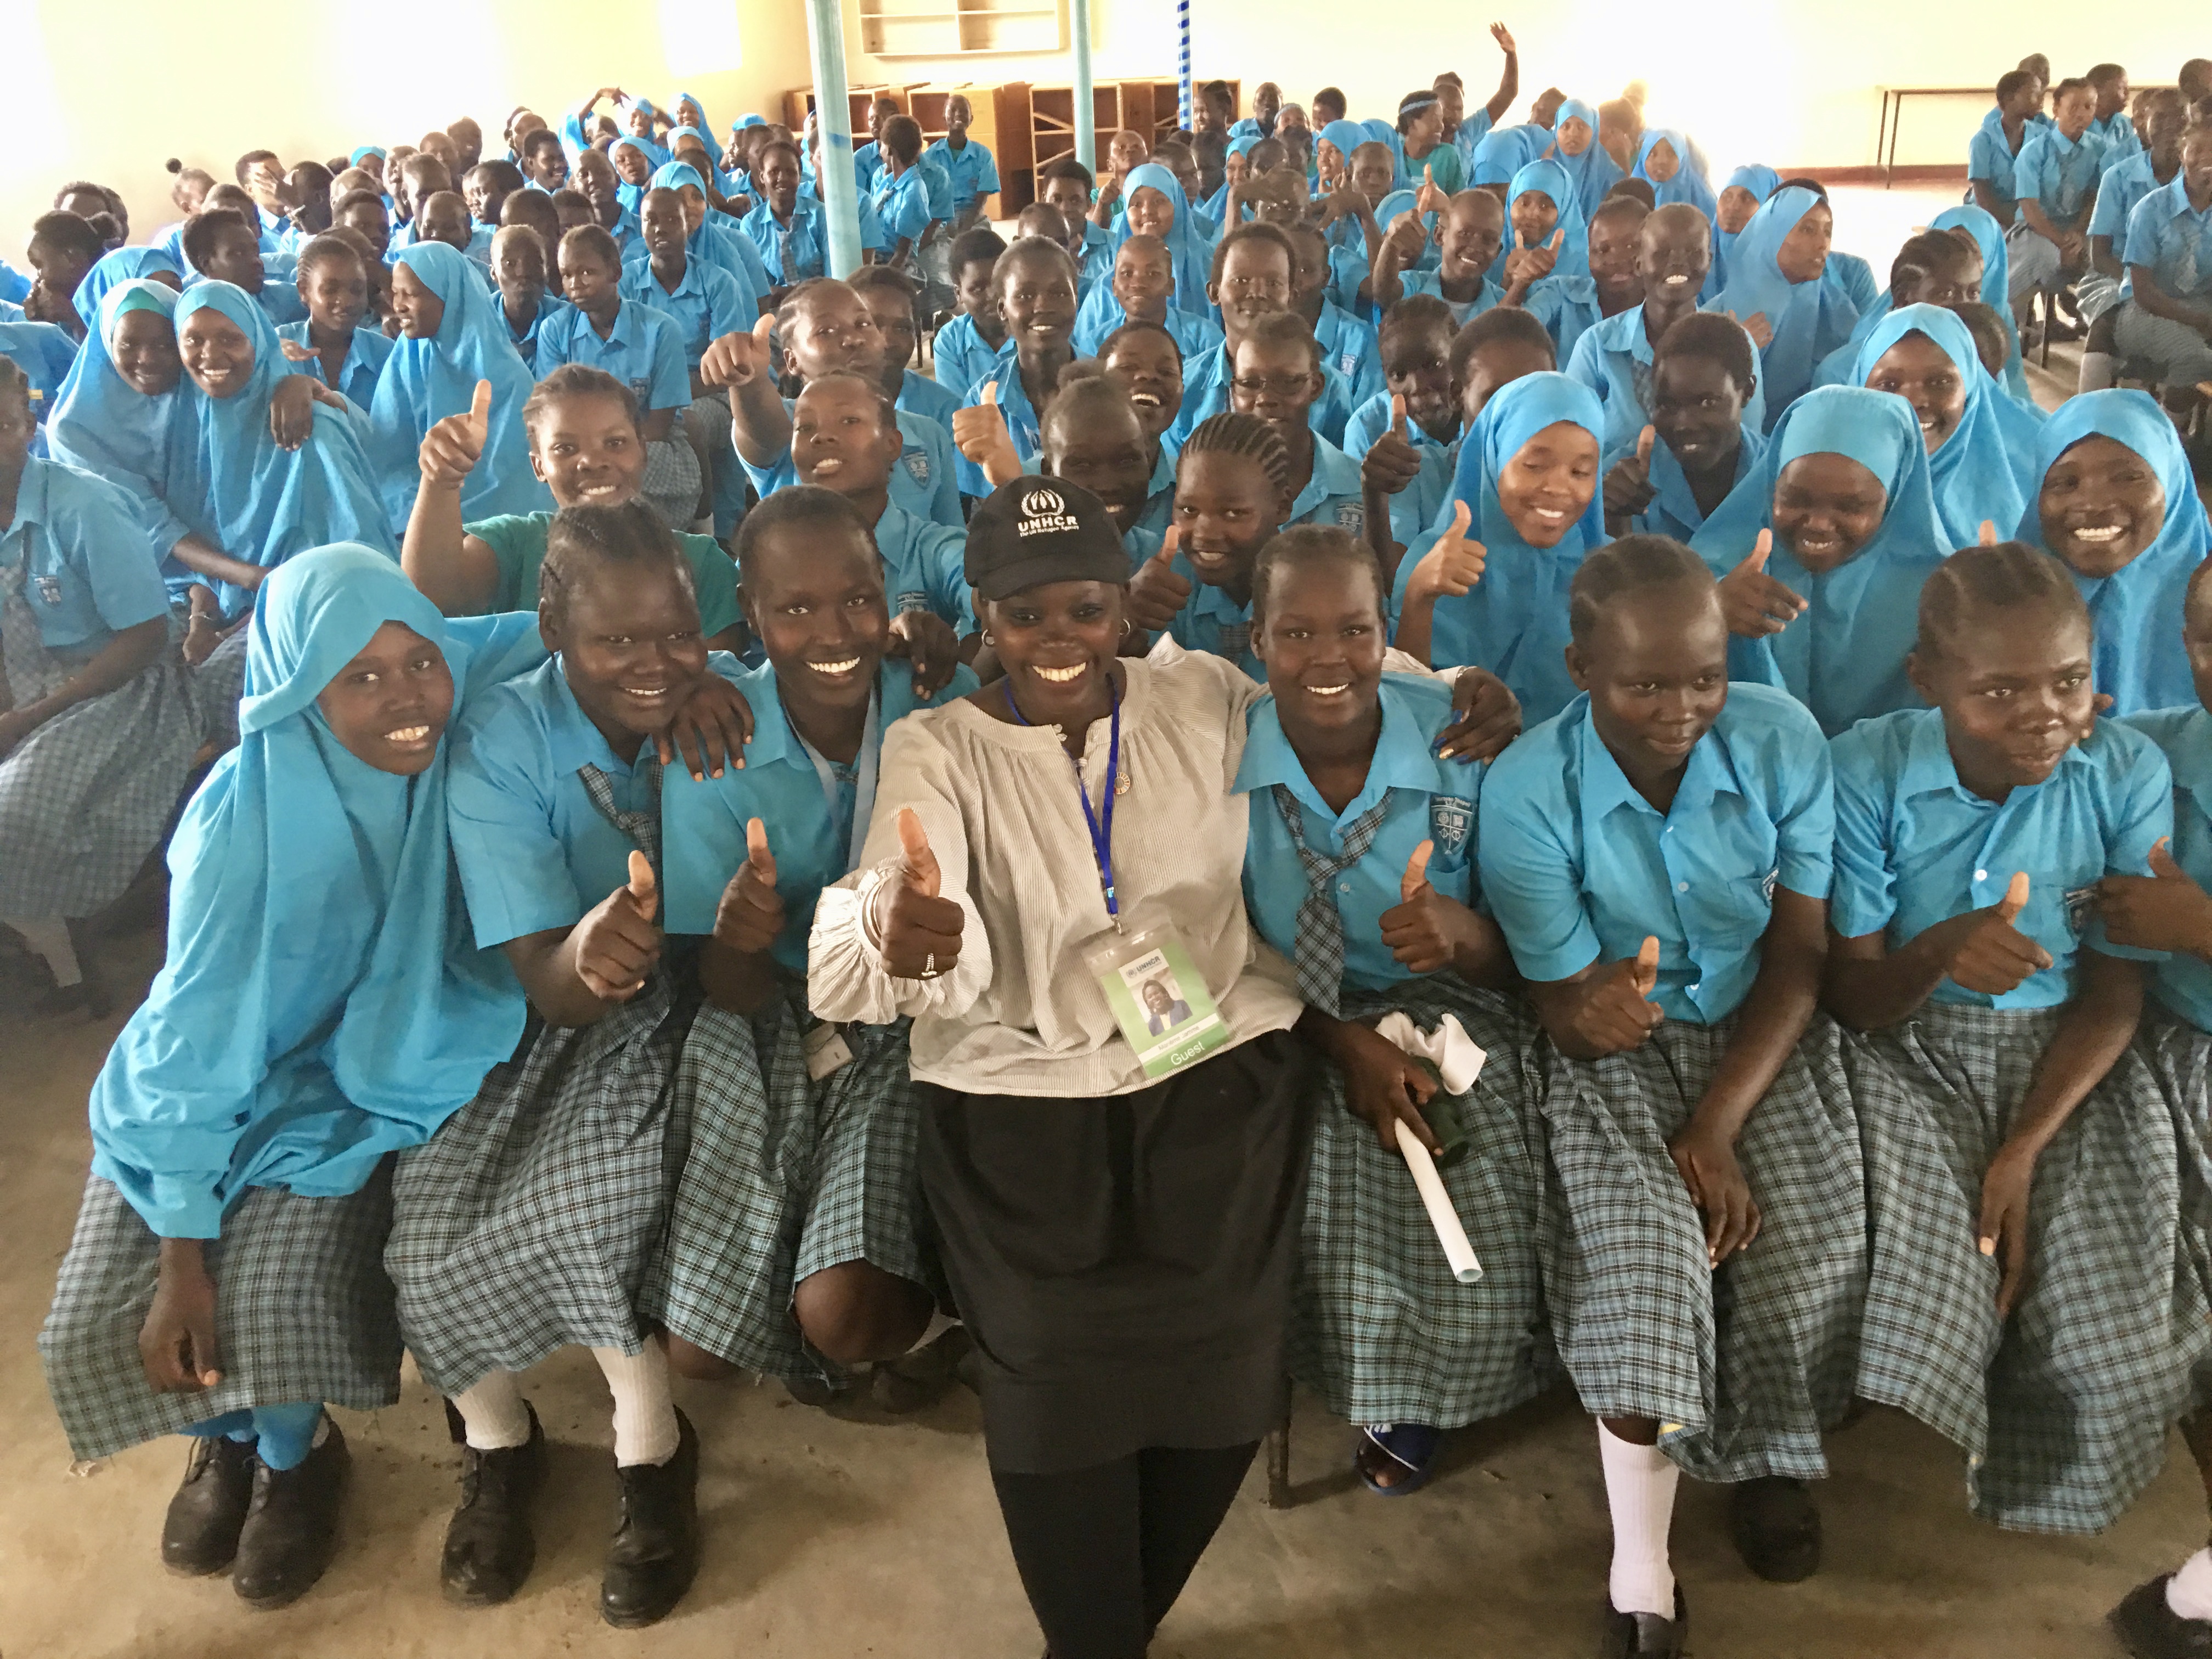 Mariéme Jamme, a World Economic Forum Young Global Leader with students at Morneau Shepell Secondary School in Kakuma. © UNHCR/Rose Ogola